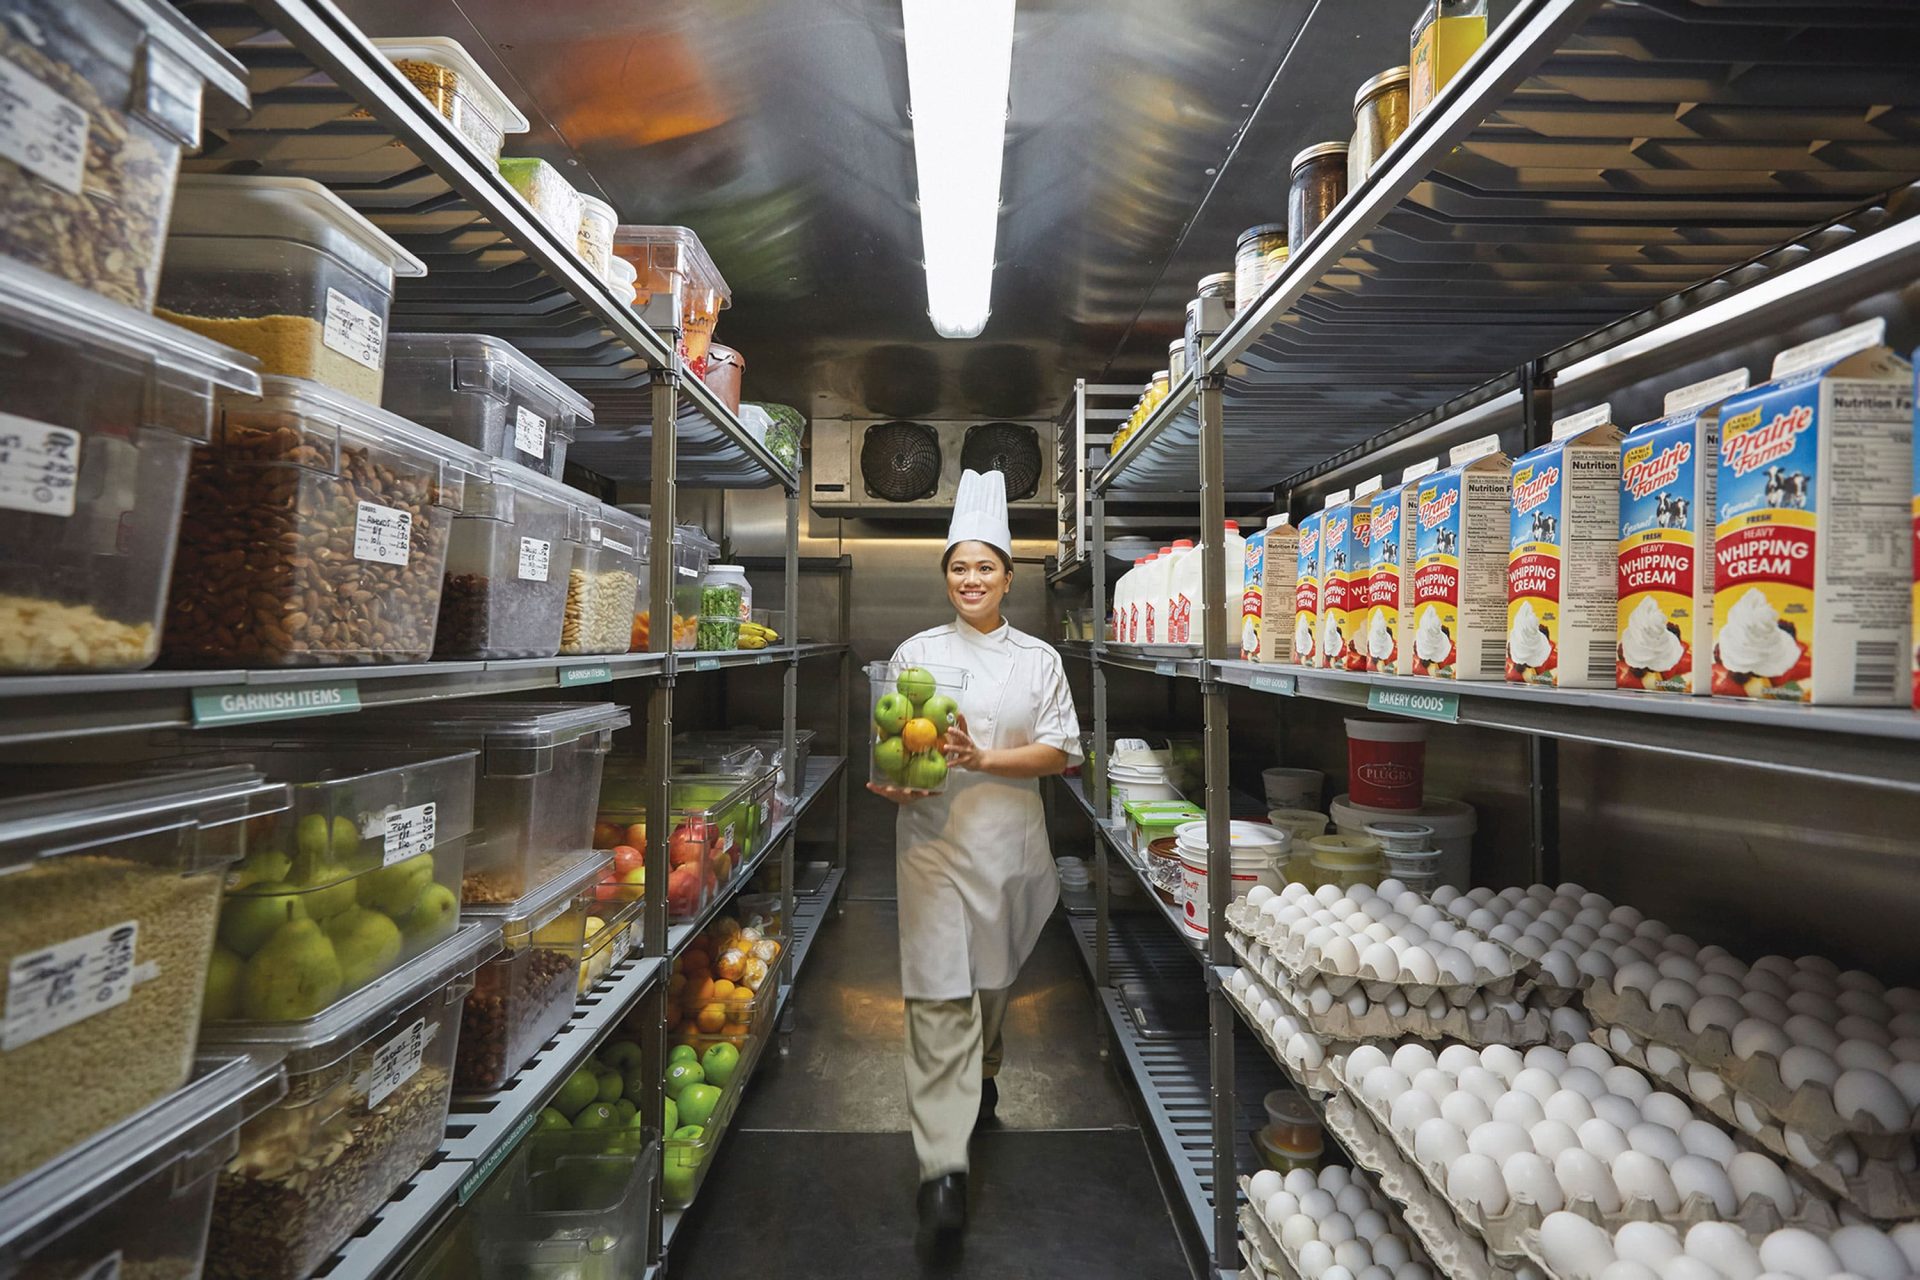 How to best store food in a commercial kitchen?